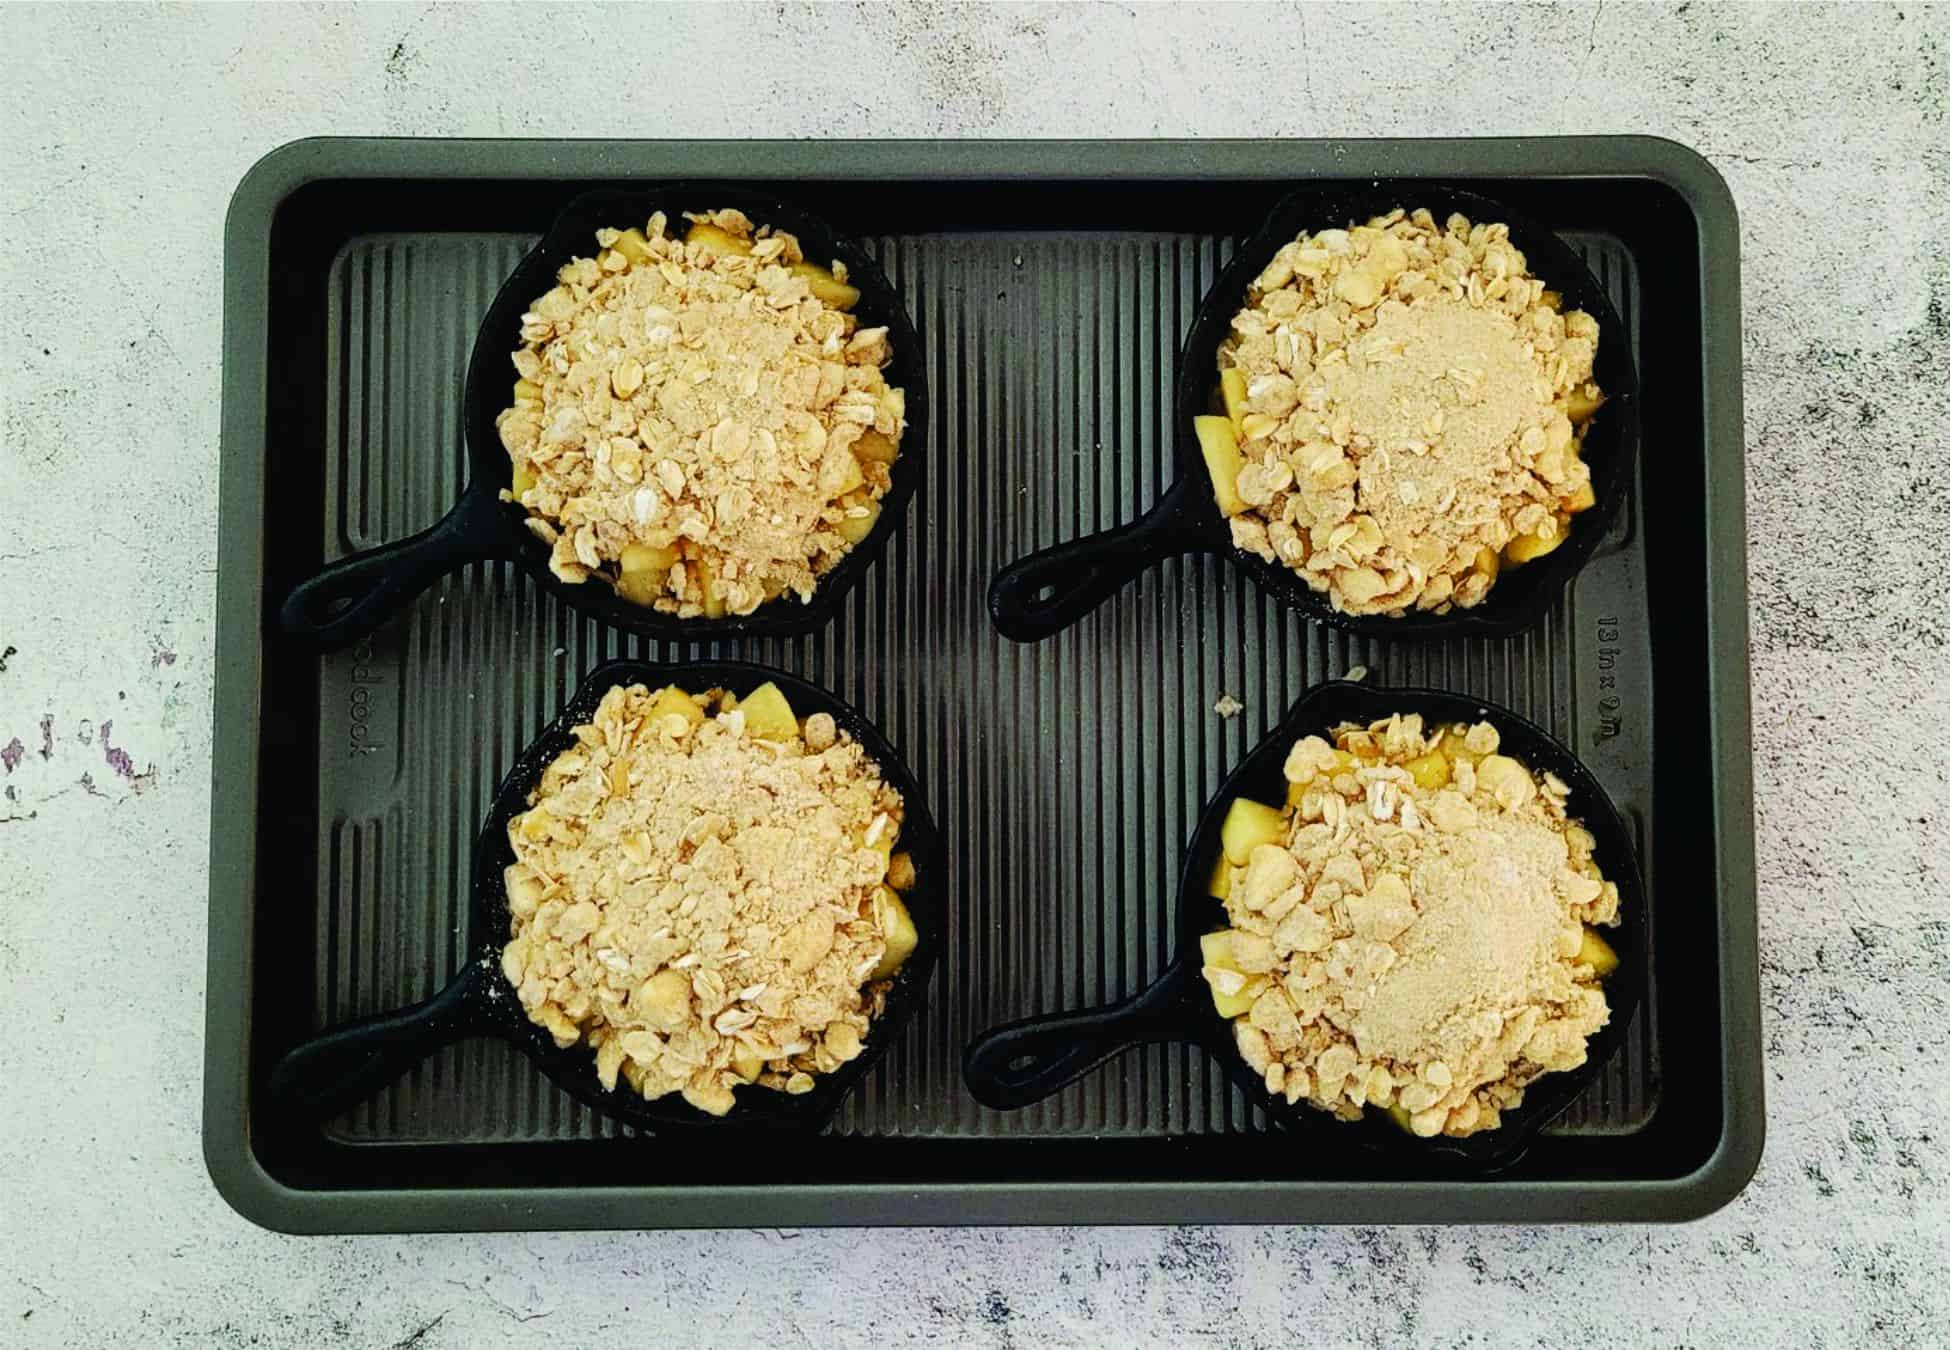 filled mini cast iron skillets with apple filling and crisp topping ready for baking